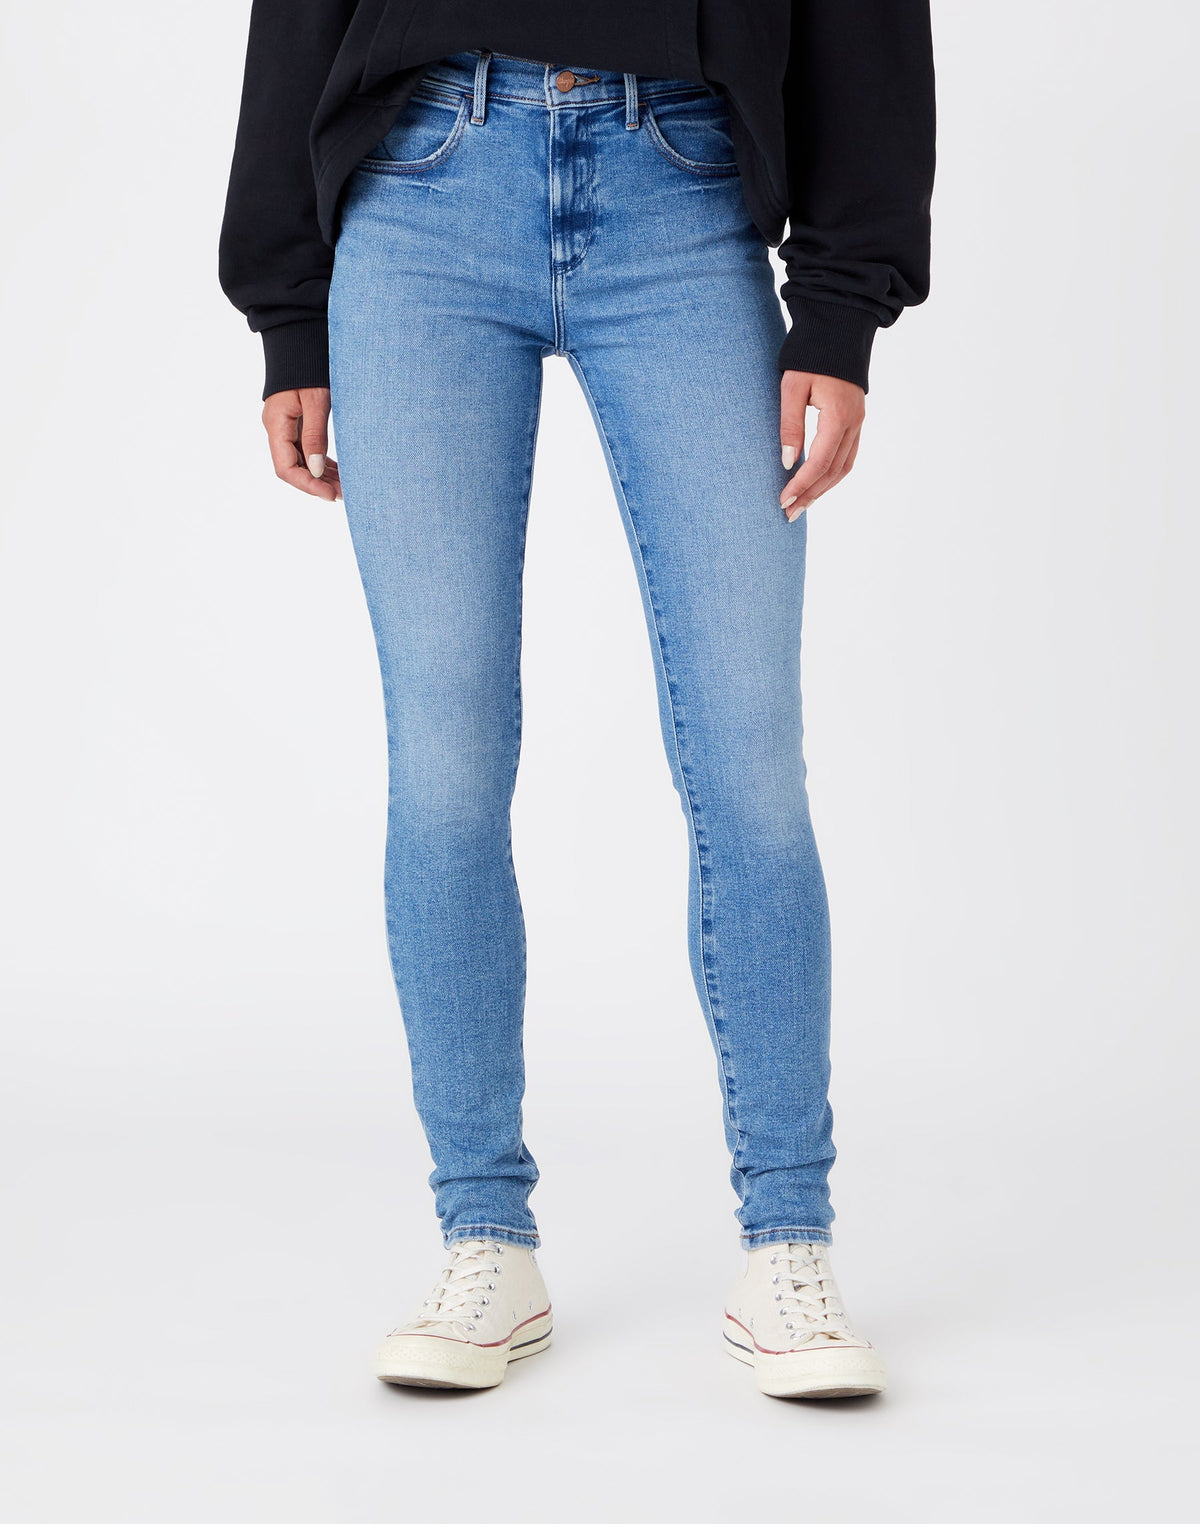 High Rise Skinny Jeans in River